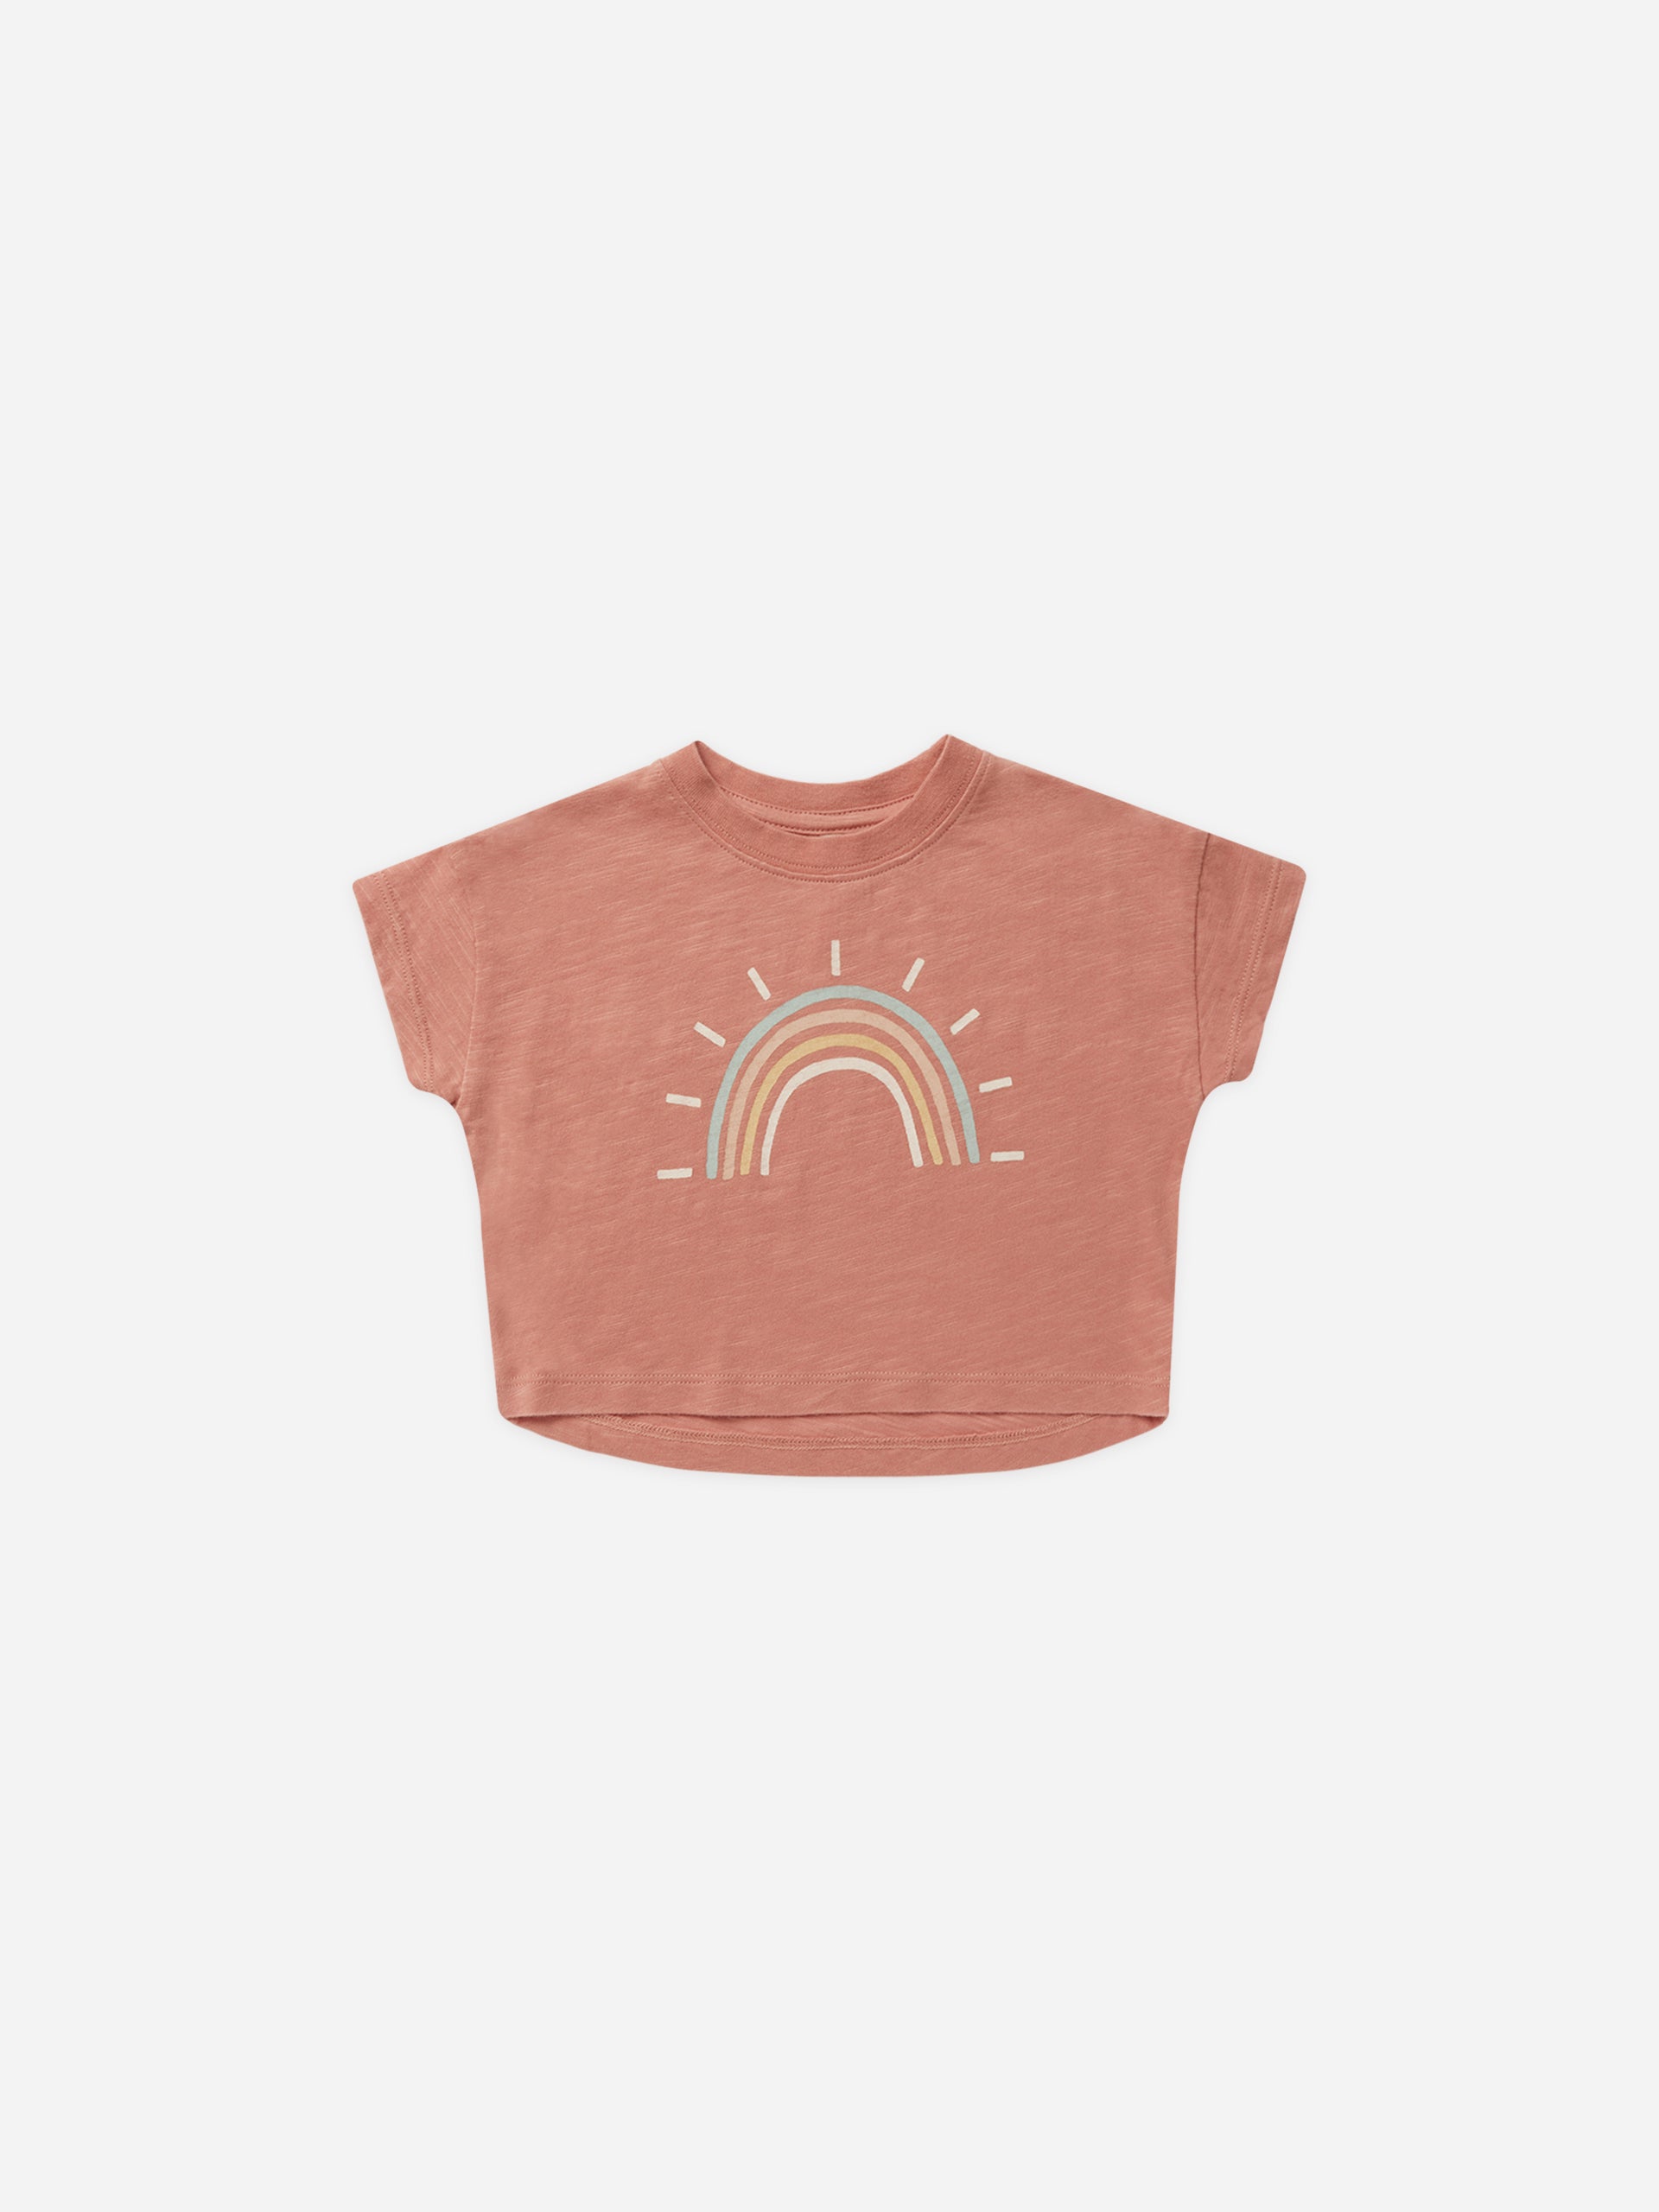 Boxy Tee || Rainbow - Rylee + Cru | Kids Clothes | Trendy Baby Clothes | Modern Infant Outfits |